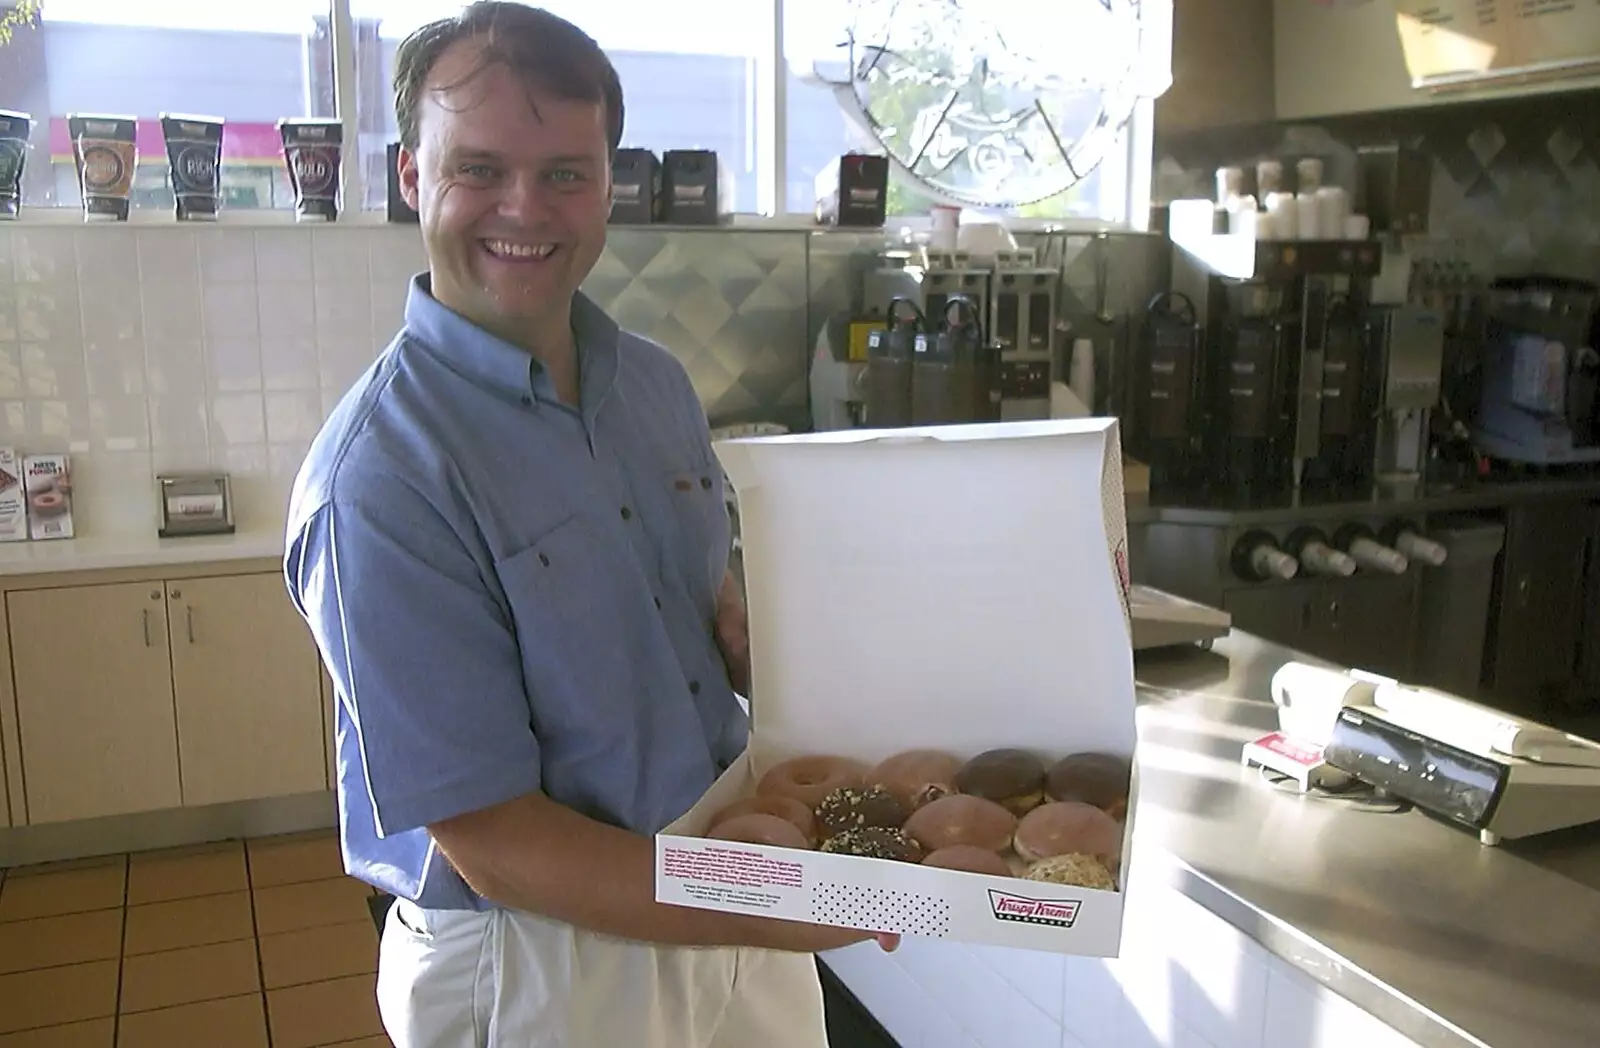 Nick shows off his prize: a 12-box of donuts, from A Trip to Libertyville, Illinois, USA - 31st August 2004